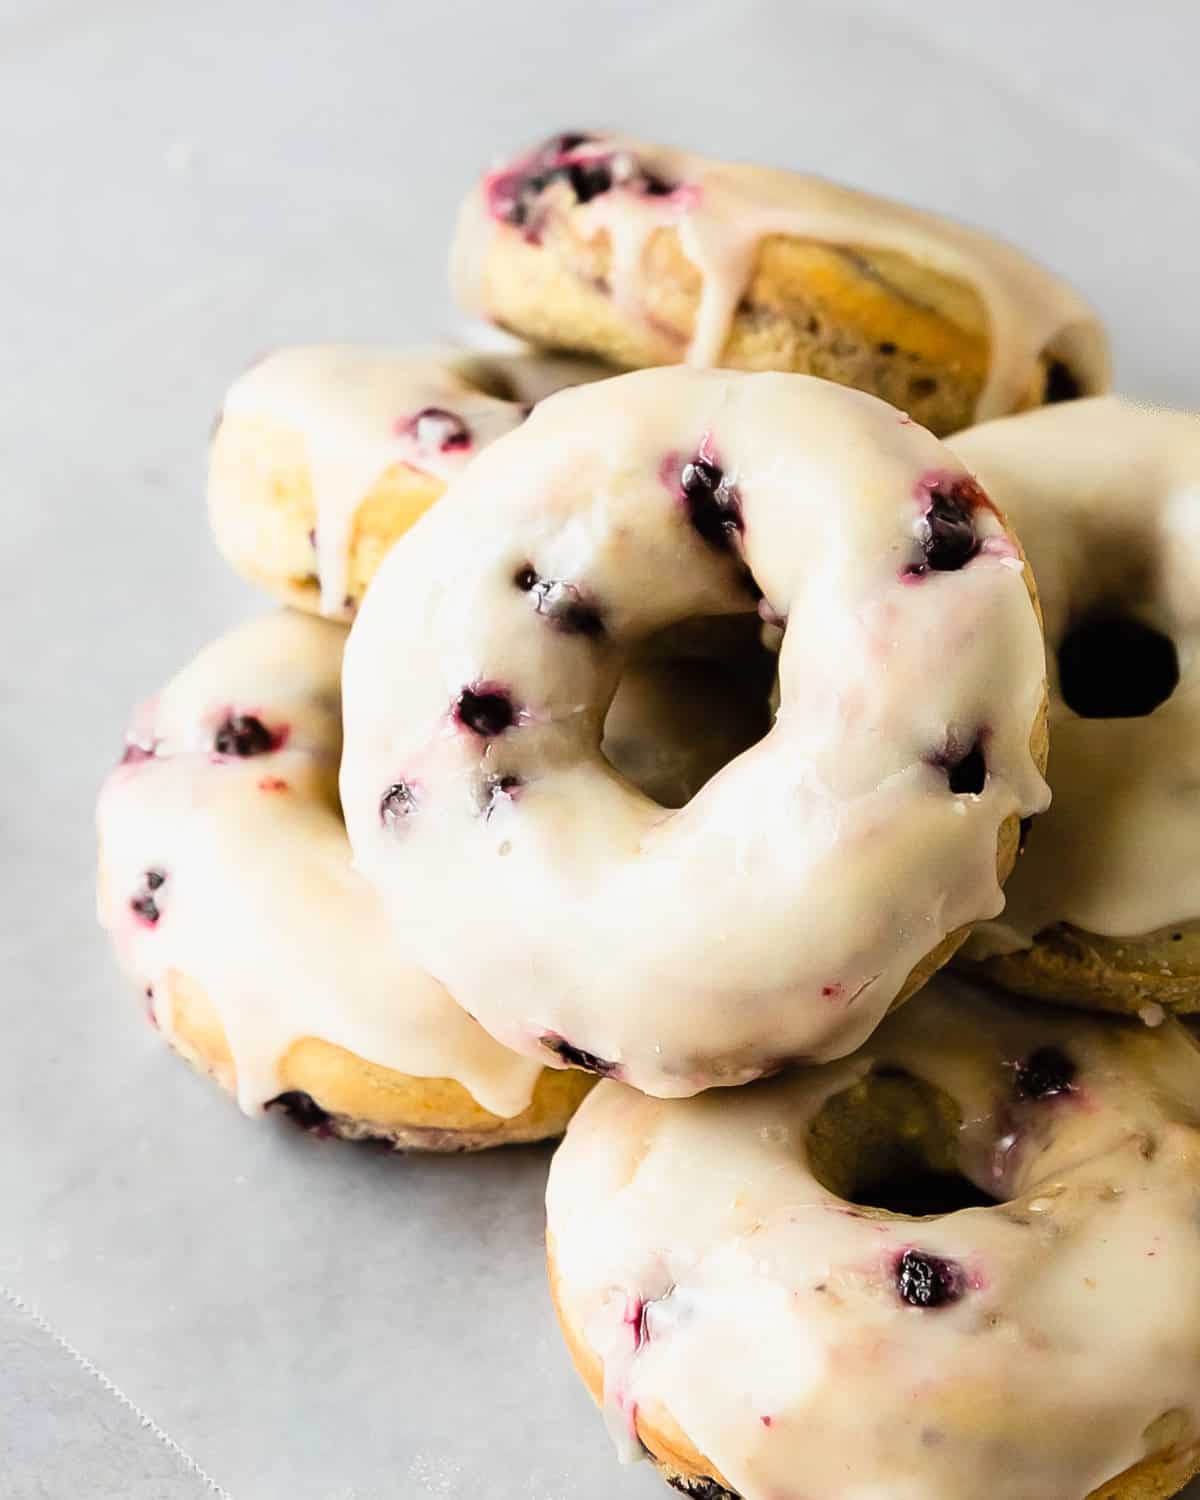 These blueberry donuts soft and fluffy cake donuts filled with fresh or frozen blueberries topped with a sweet and tart lemon glaze. The next time you want a fresh but cozy breakfast treat, grab your donut pan, a couple of mixing bowls, a whisk and make the best blueberry cake donuts. 